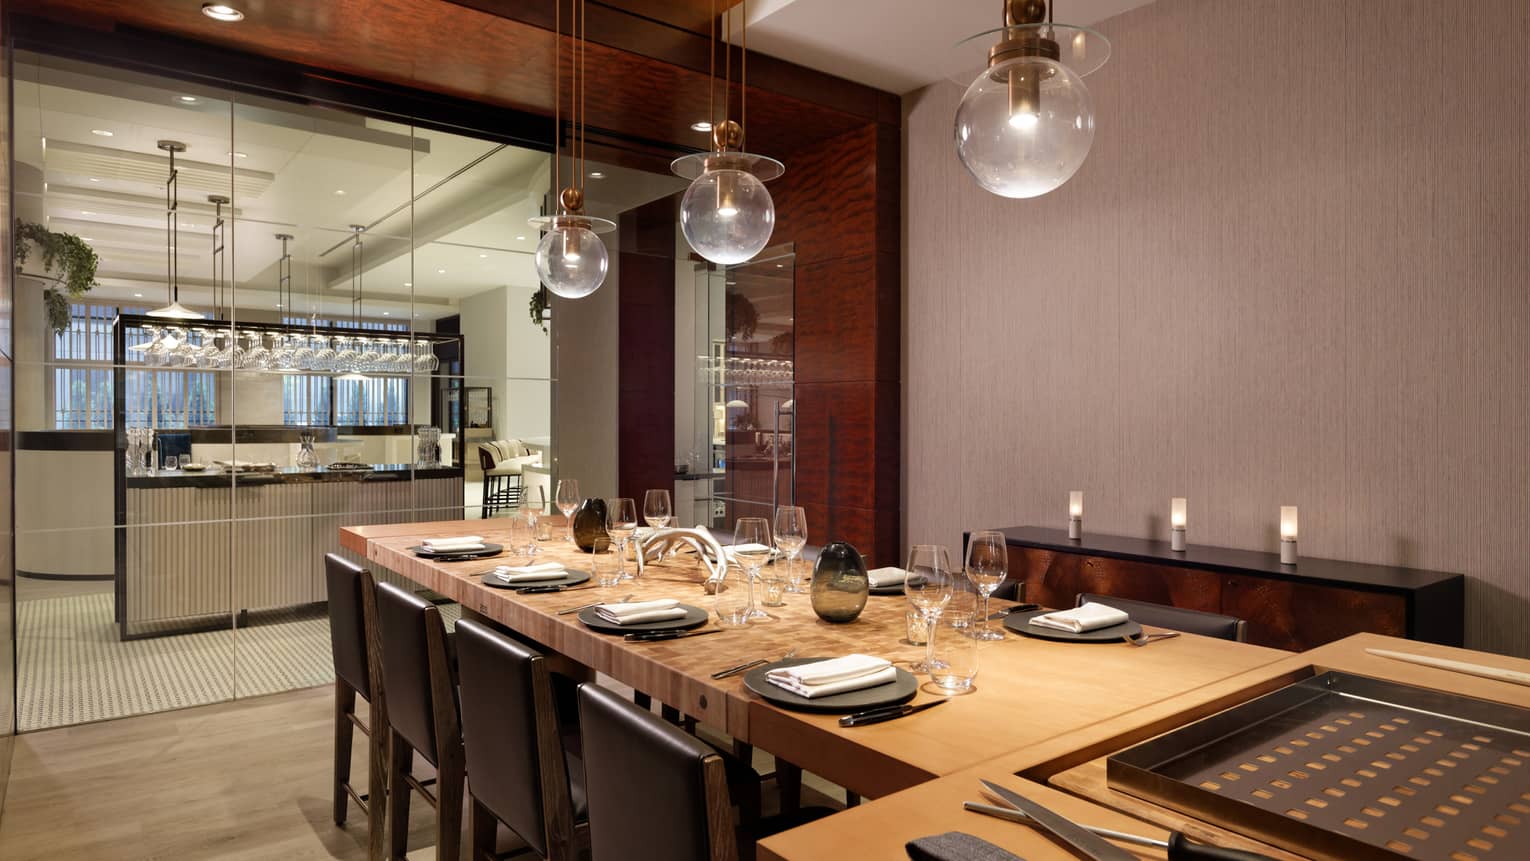 A large dining table with a carving station next to a clean open kitchen.